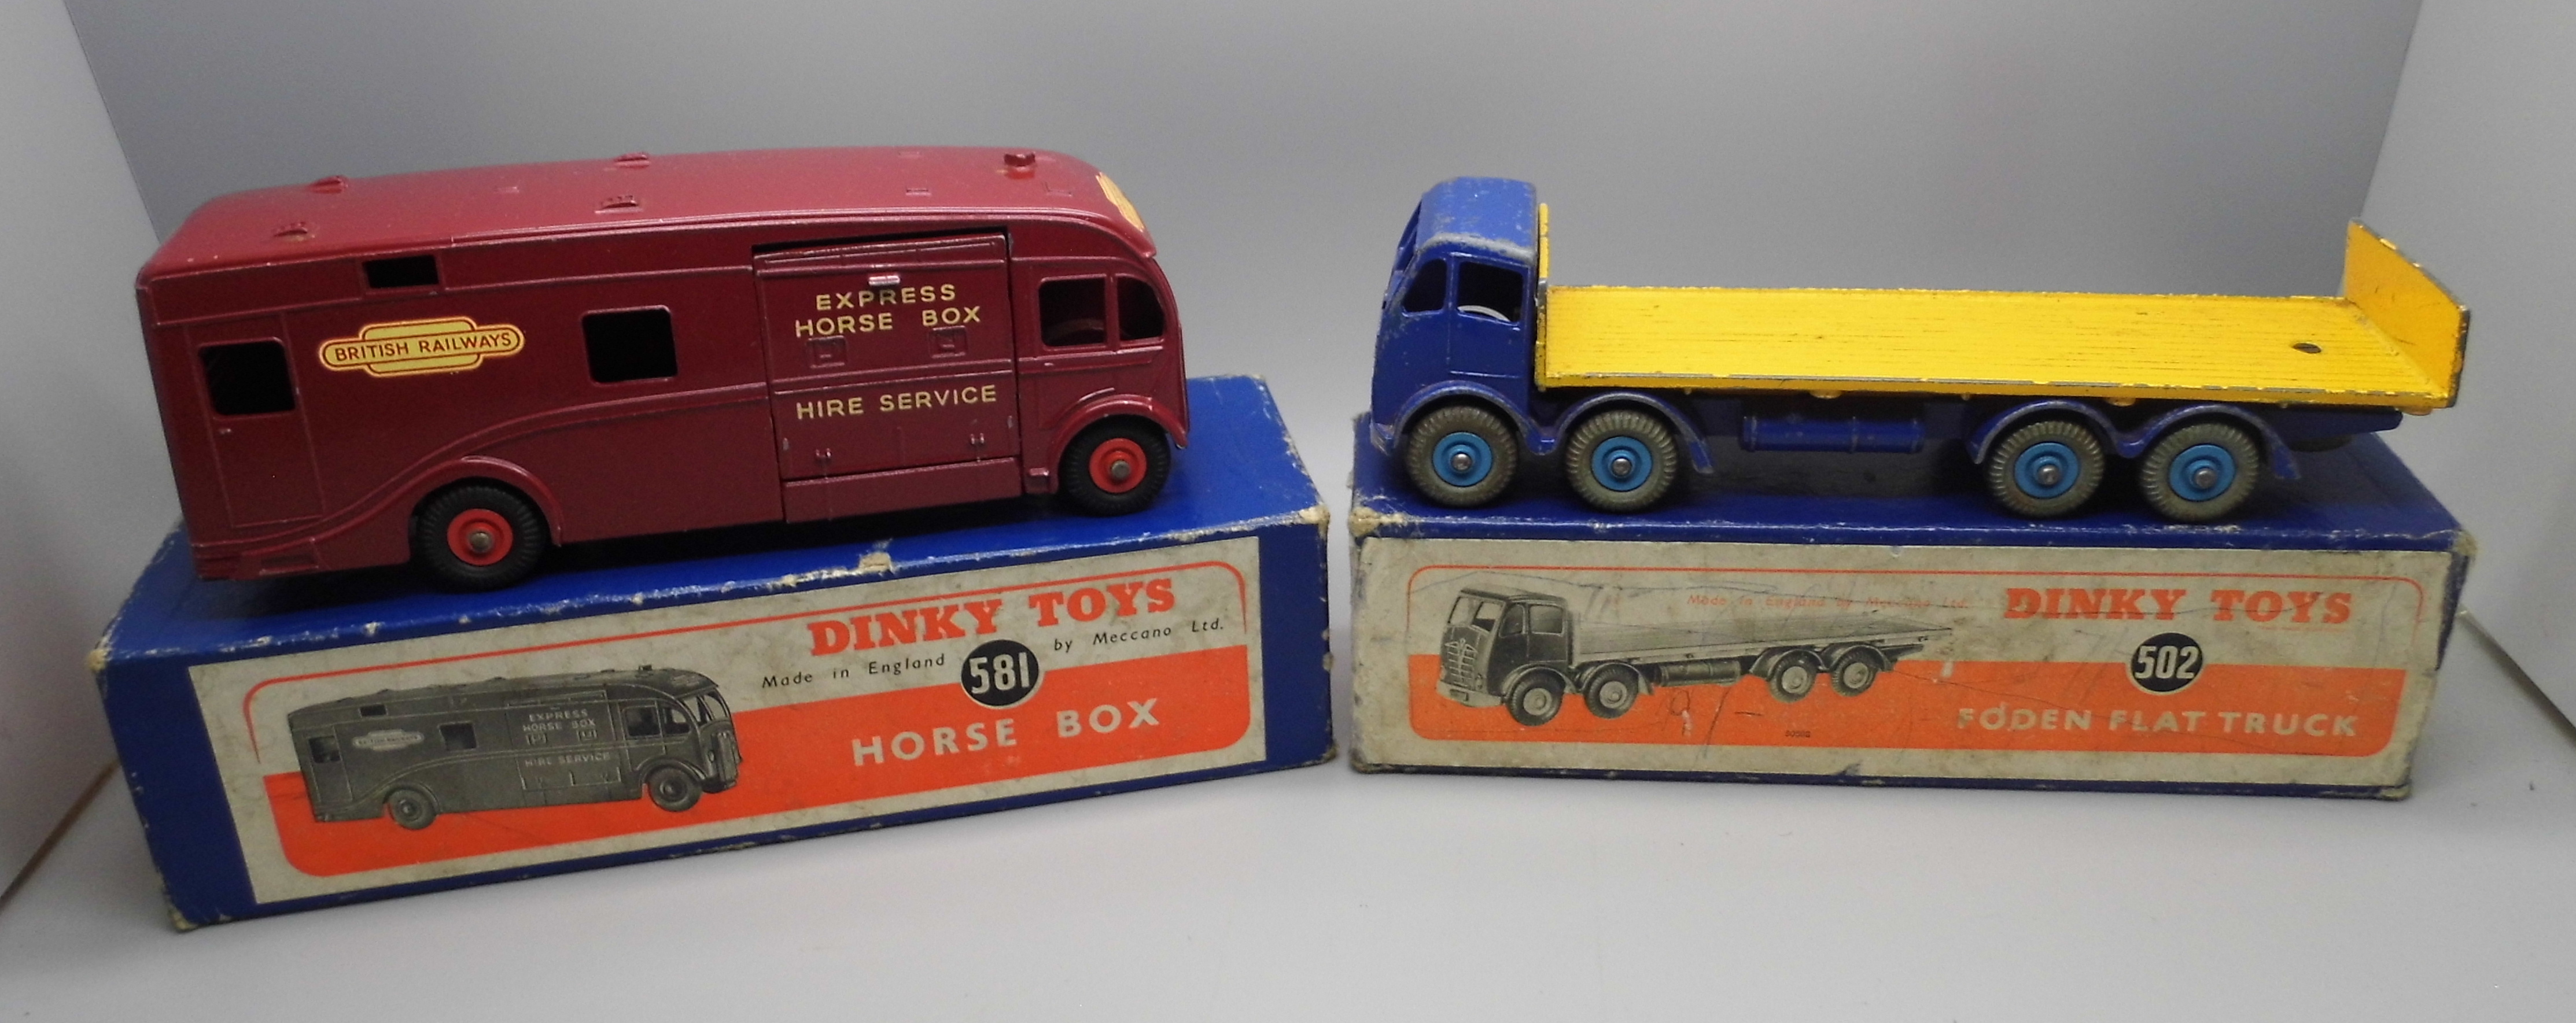 Two Dinky Toys model vehicles:- no. 581 Horse Box and a no. 502 Foden Flat Truck, no. 502